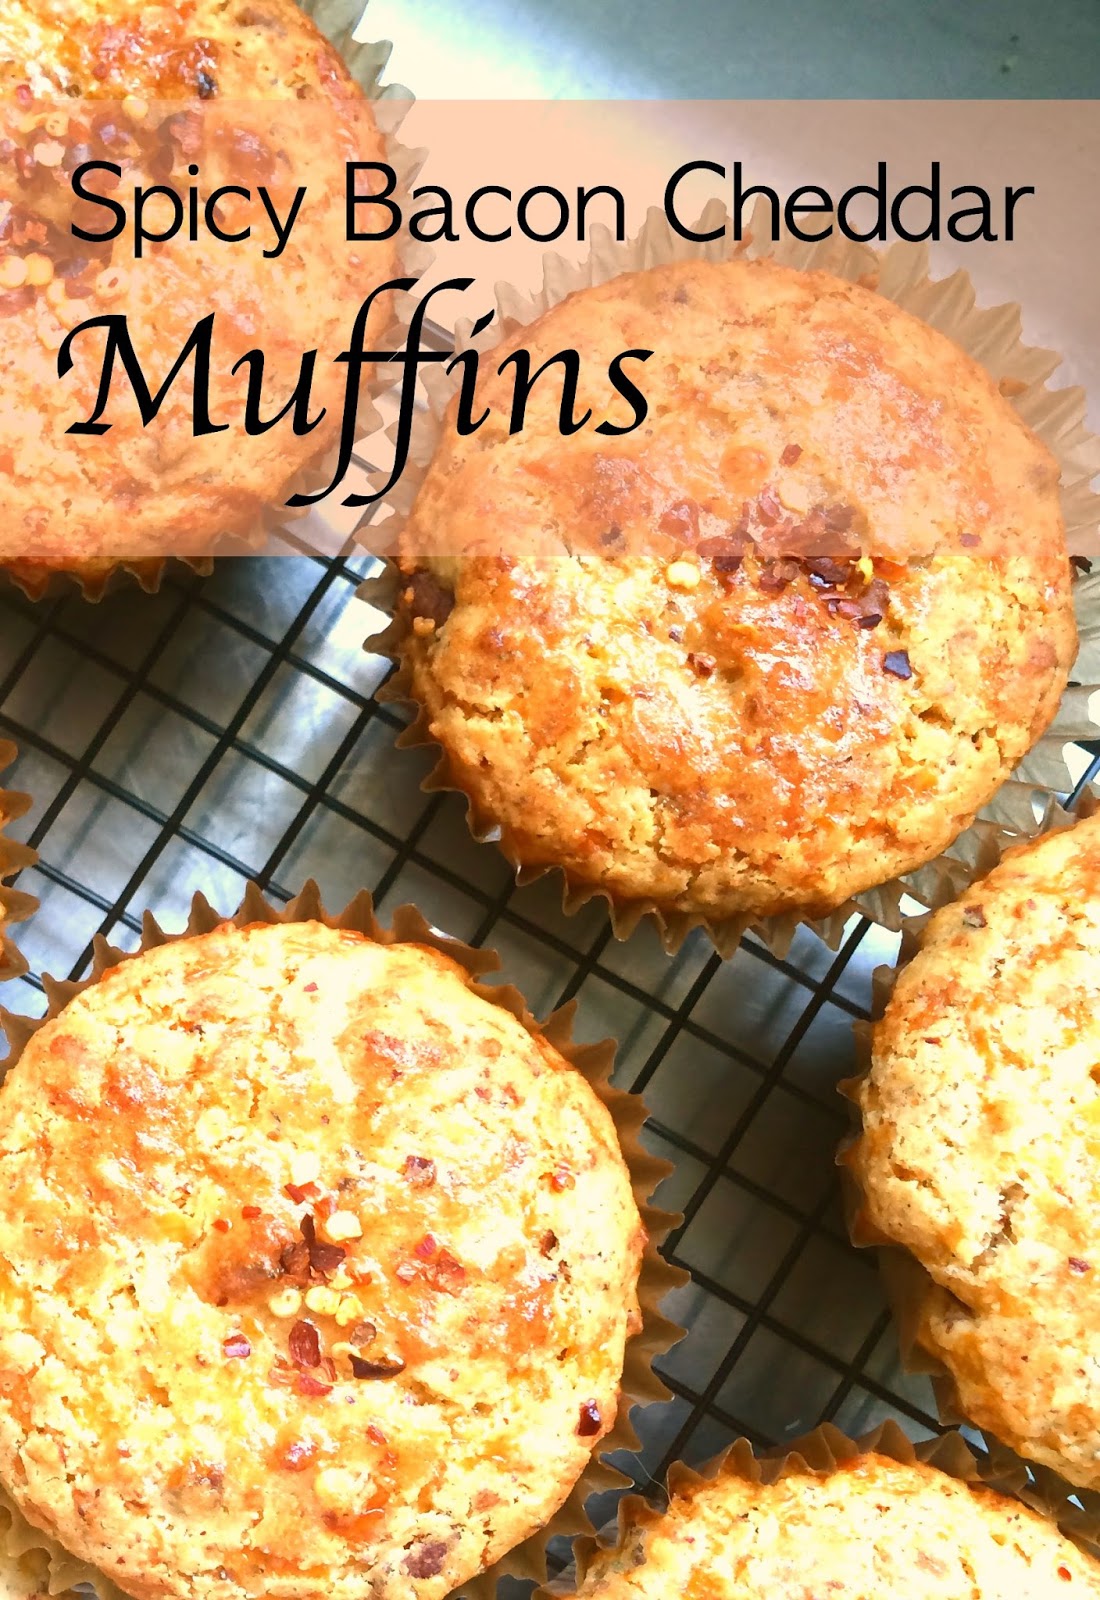 Heaven can wait : Spicy Bacon Cheddar Muffins